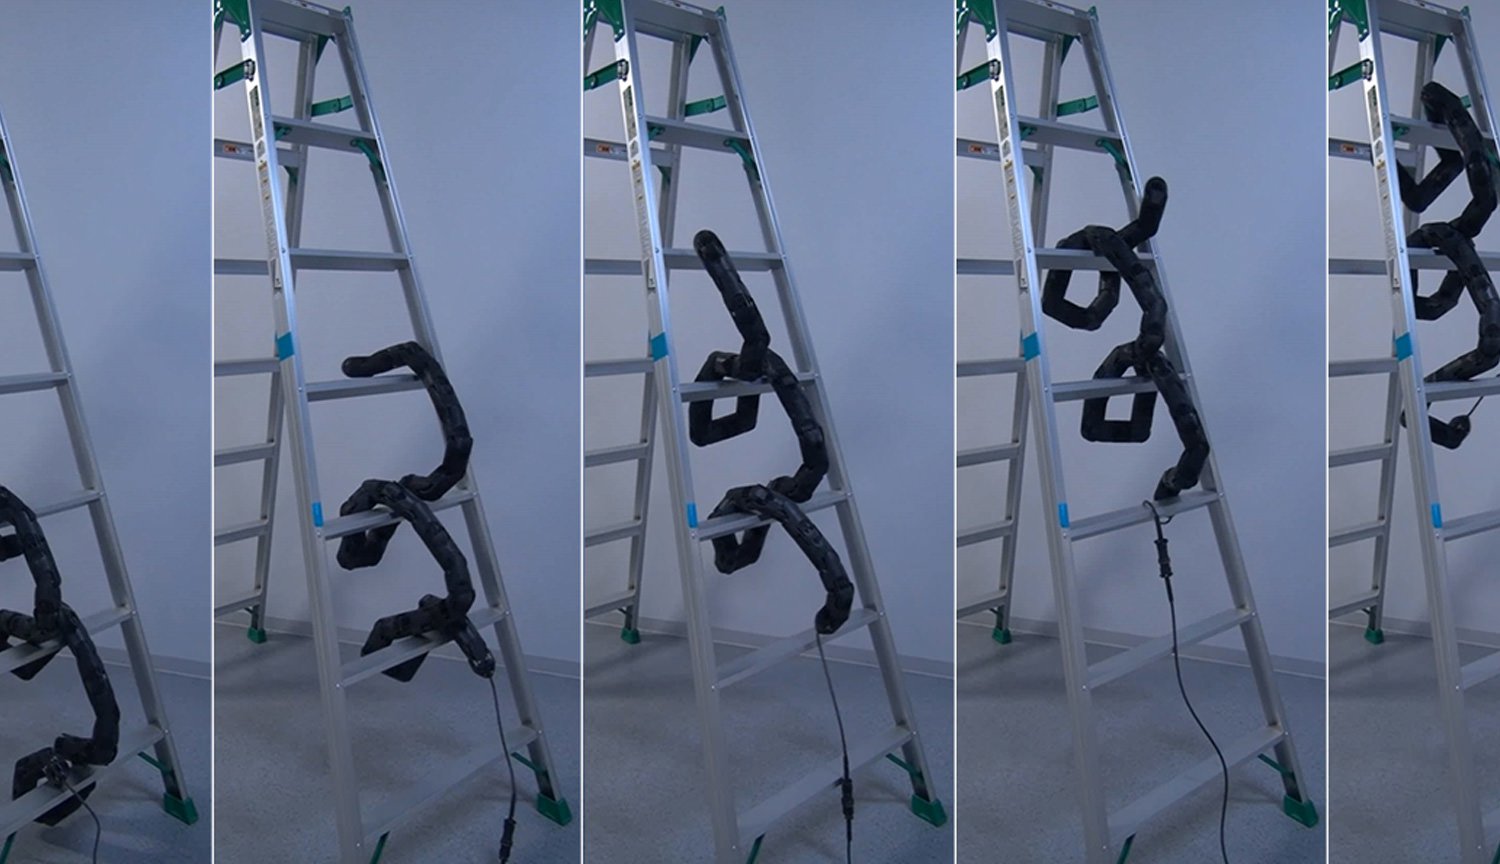 The robot-snake learned how to climb a ladder